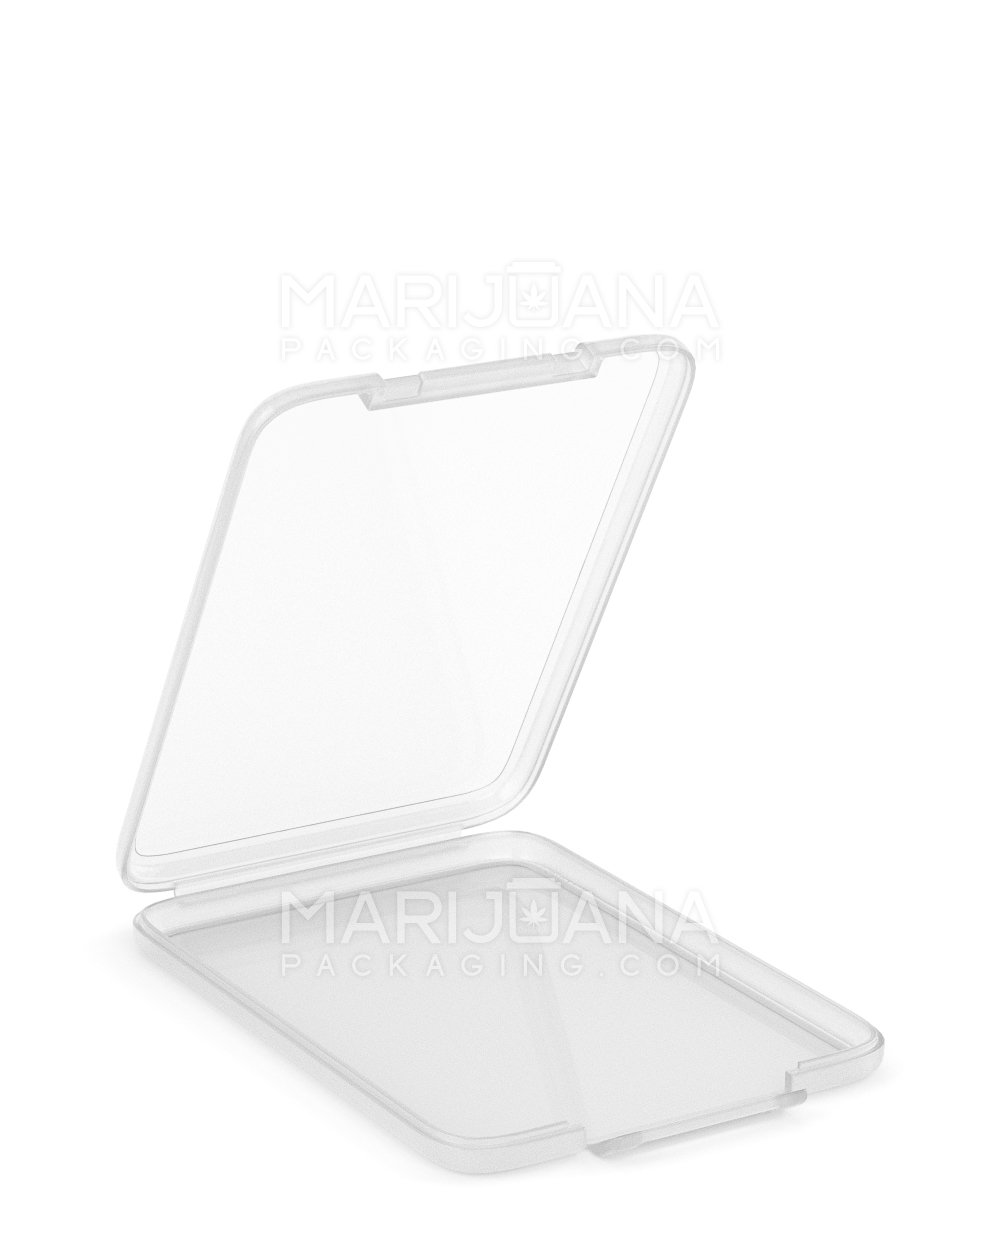 Hinged Lid Slim Shatter Container | 4.5 mm - Clear Plastic - 1000 Count - 1